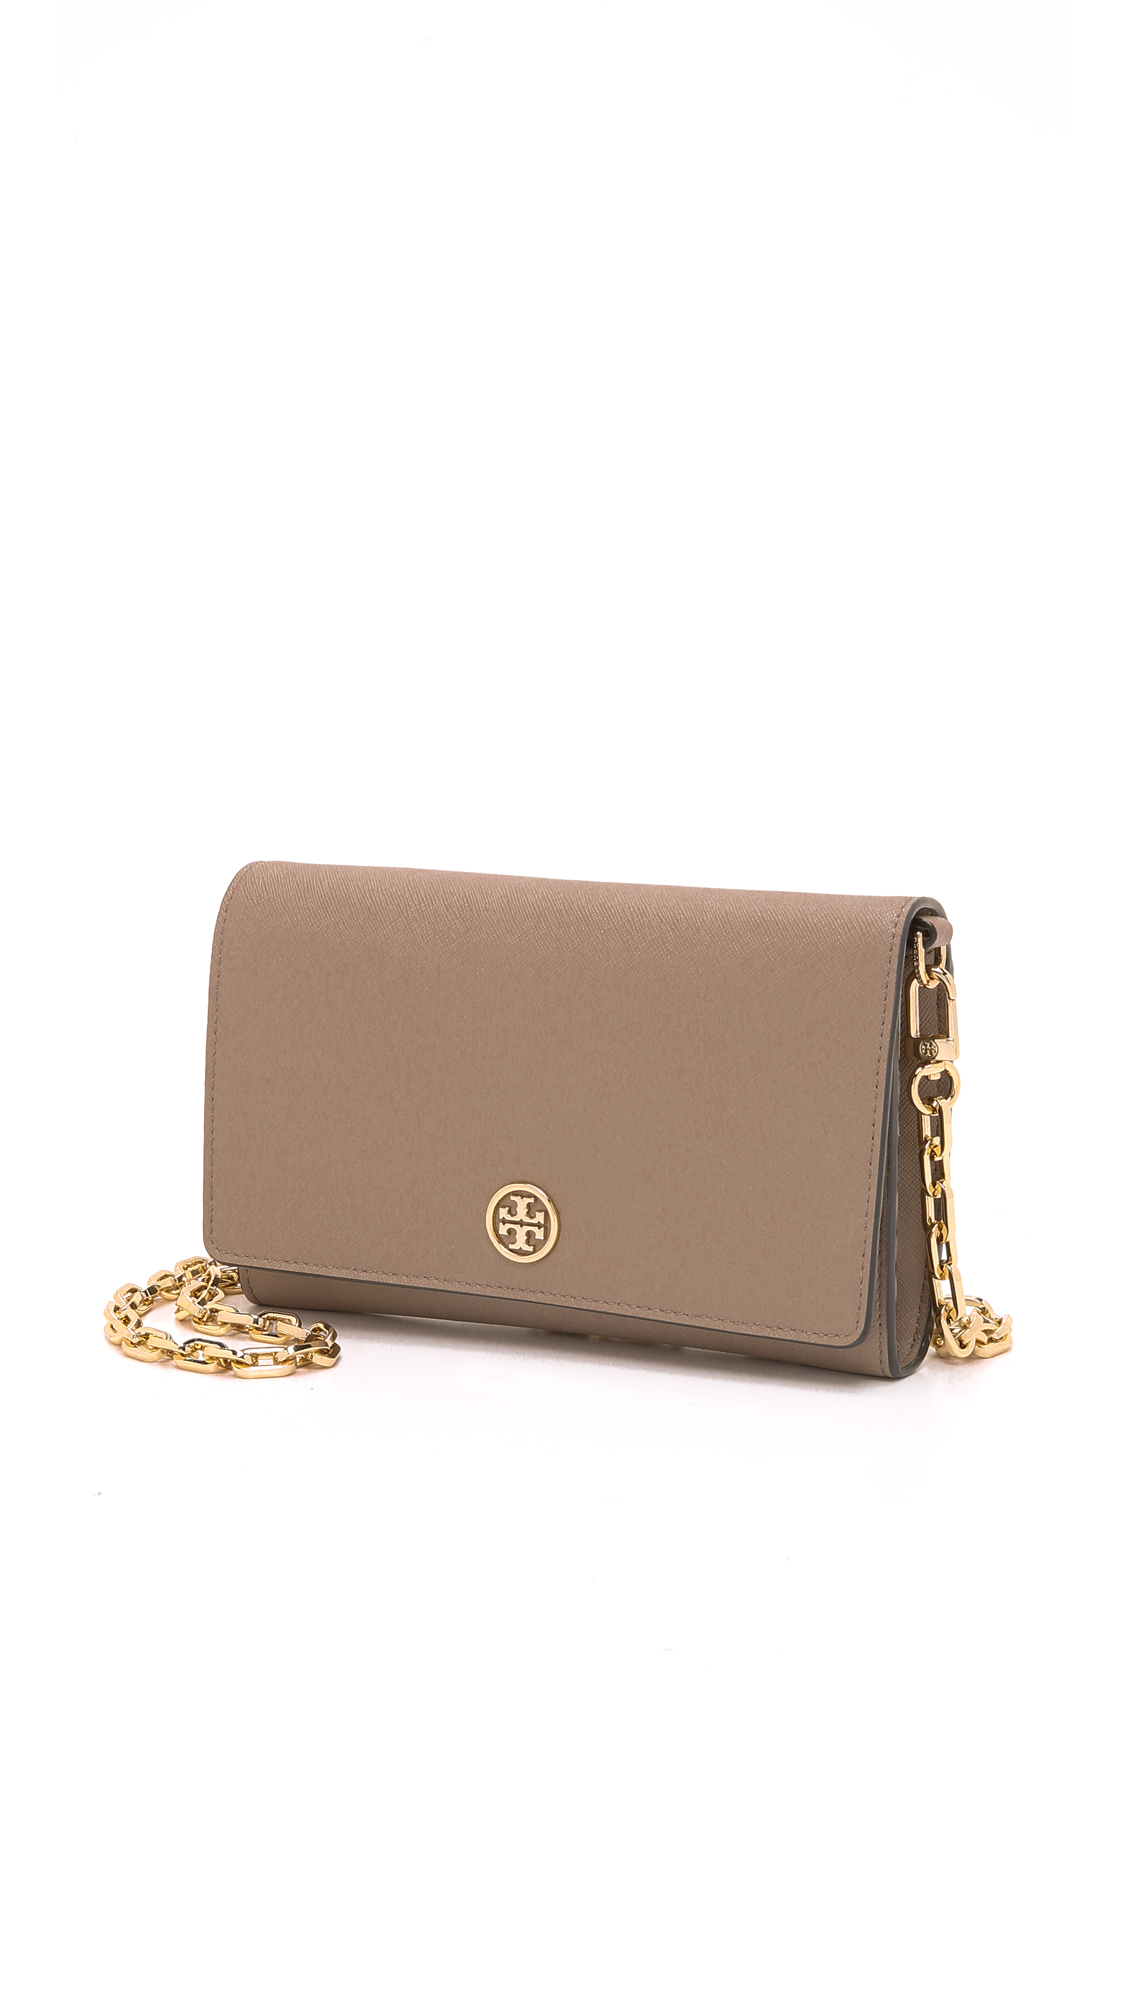 Lyst - Tory Burch Robinson Wallet-On-Chain in Gray